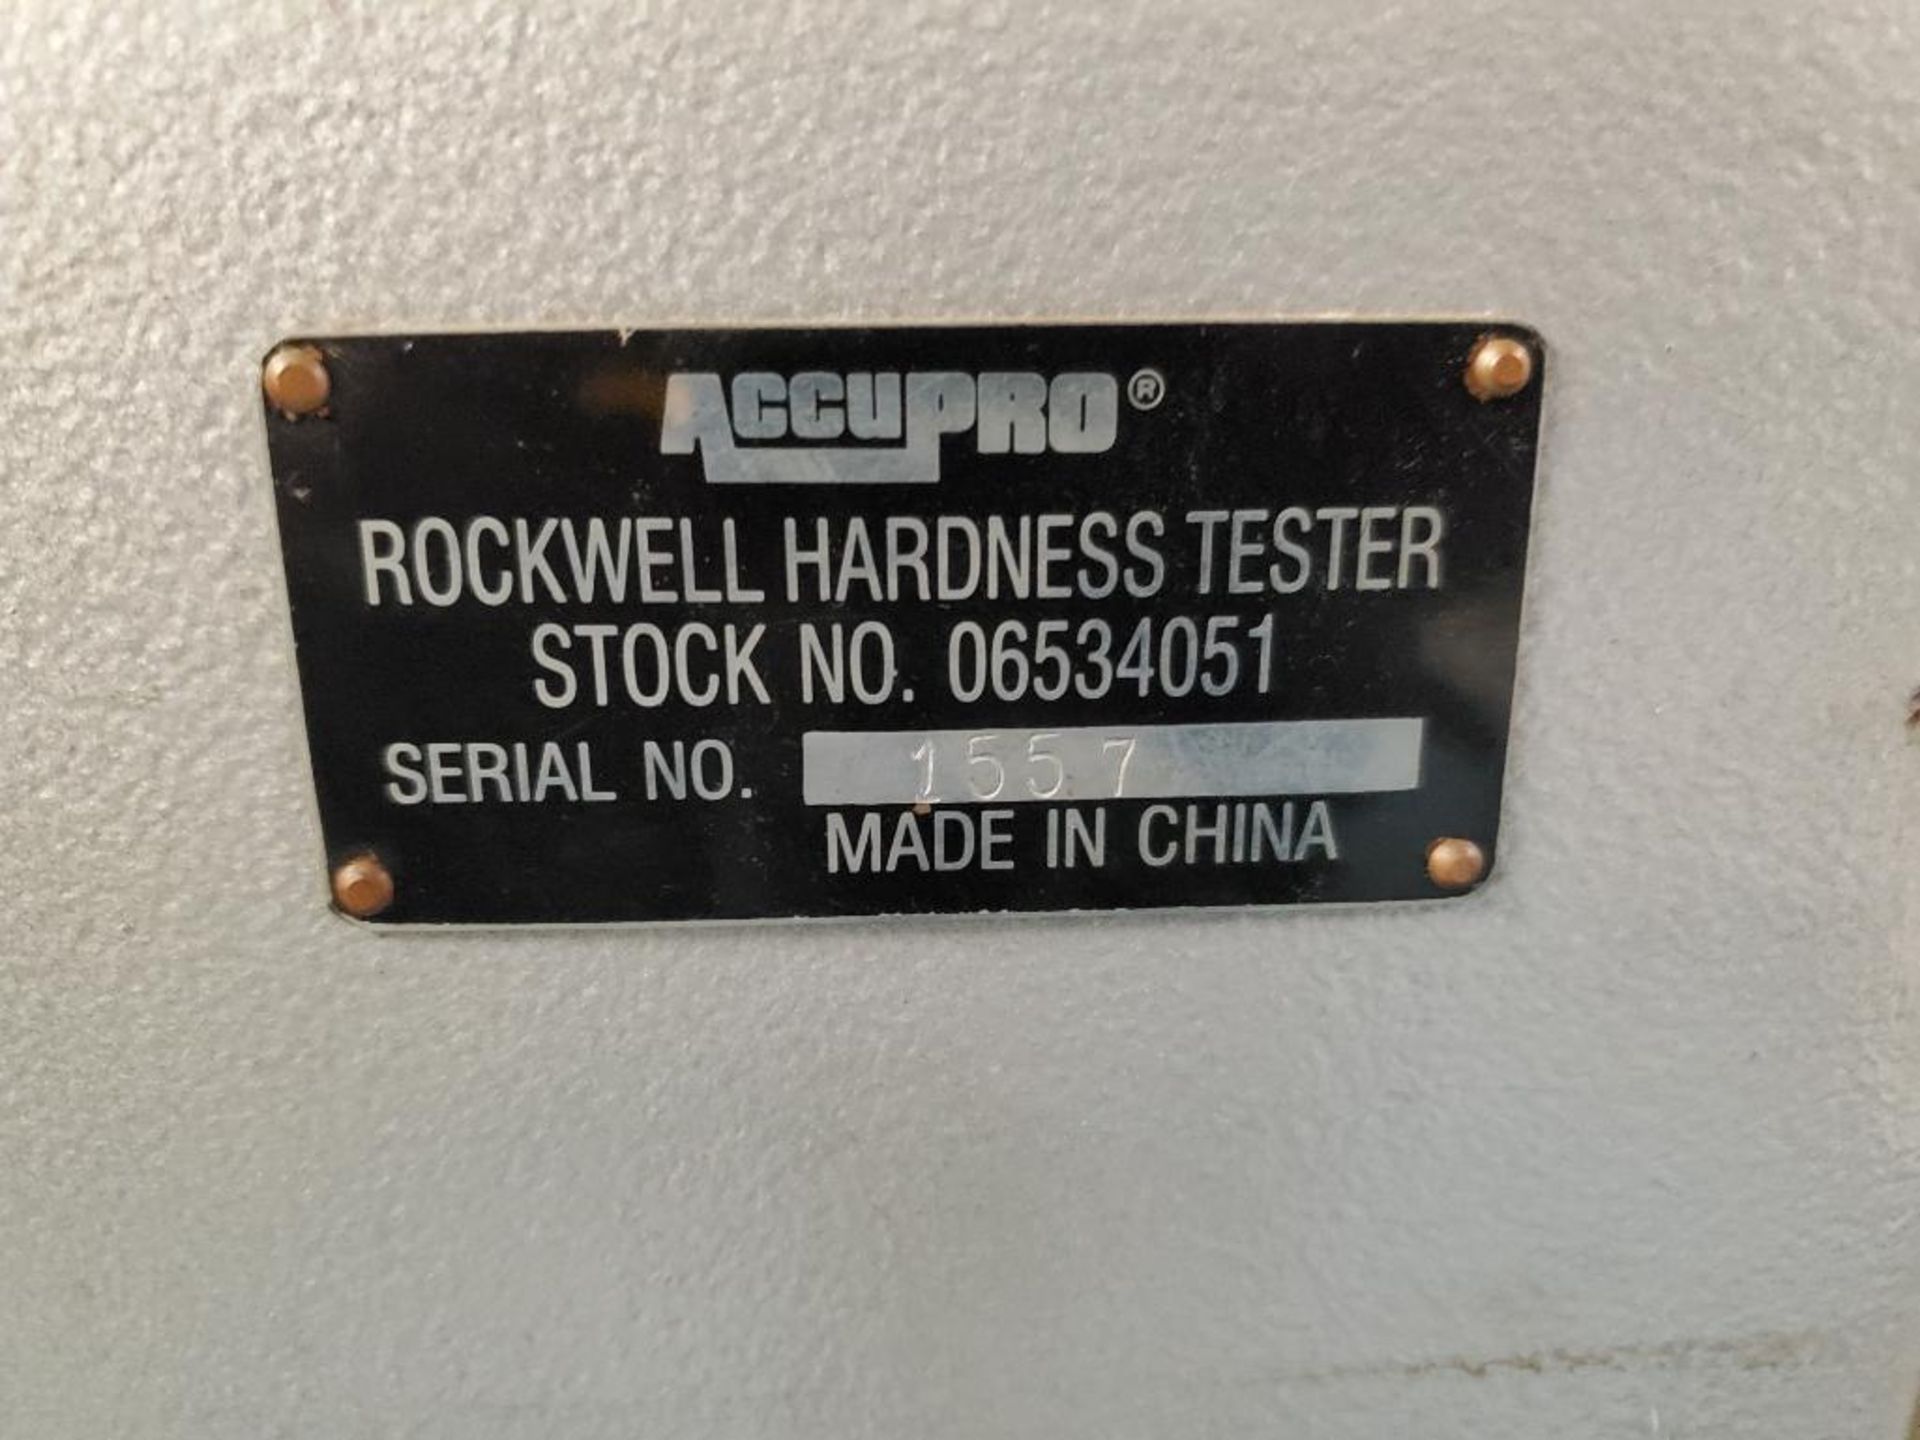 Accupro Rockwell Hardness Tester 06534051. Serial#1557. - Image 3 of 7